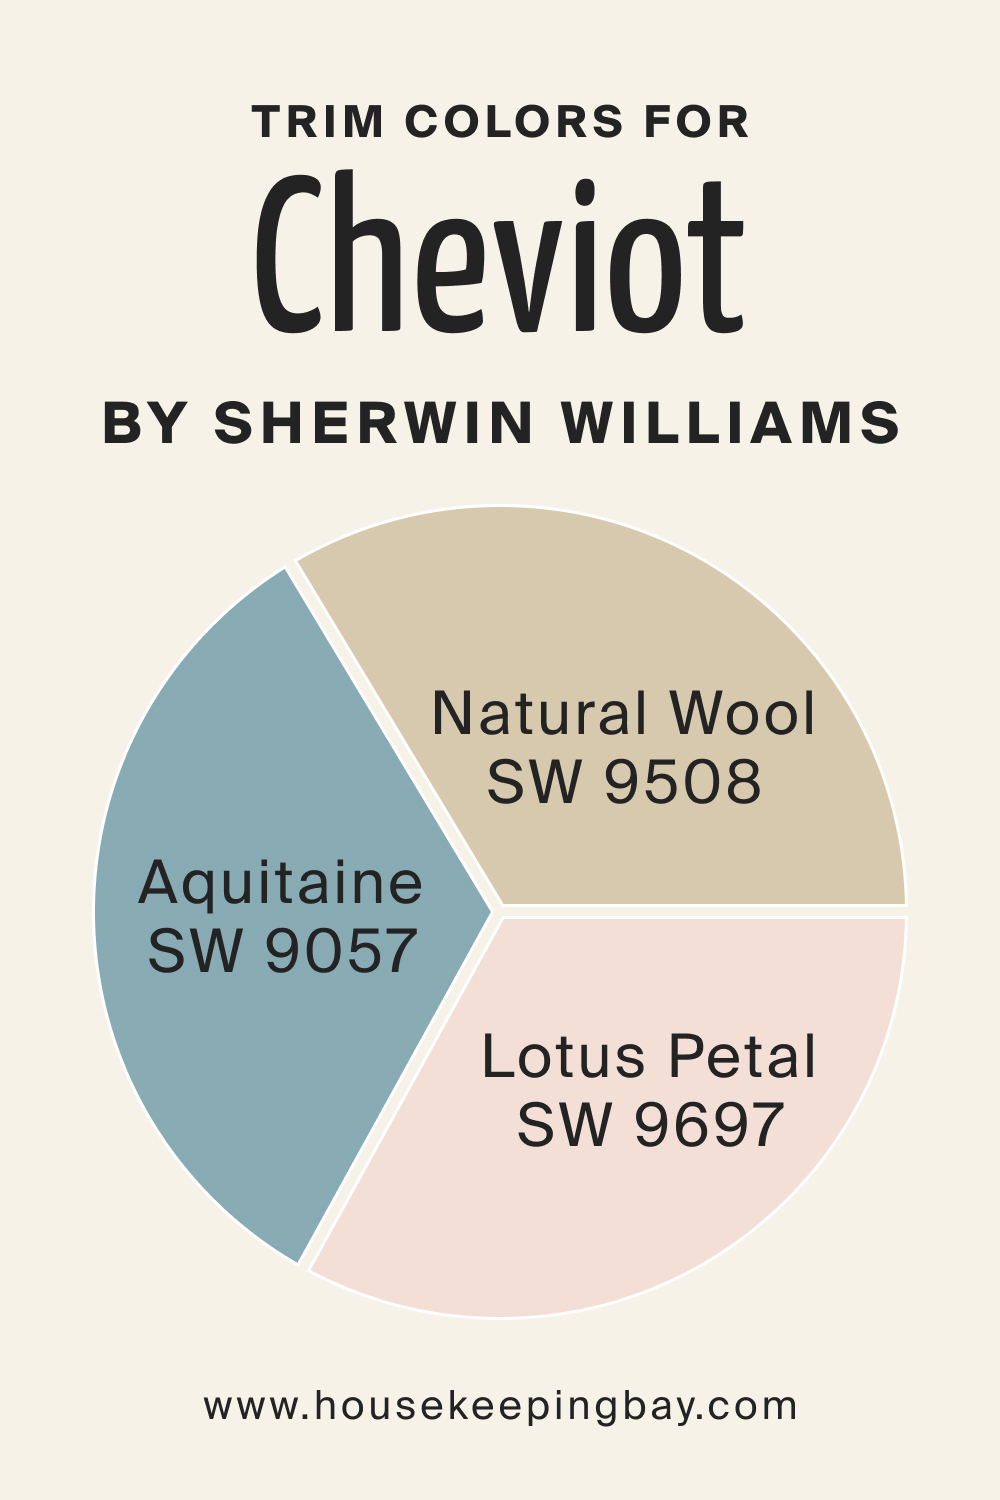 Trim Colors of SW 9503 Cheviot by Sherwin Williams